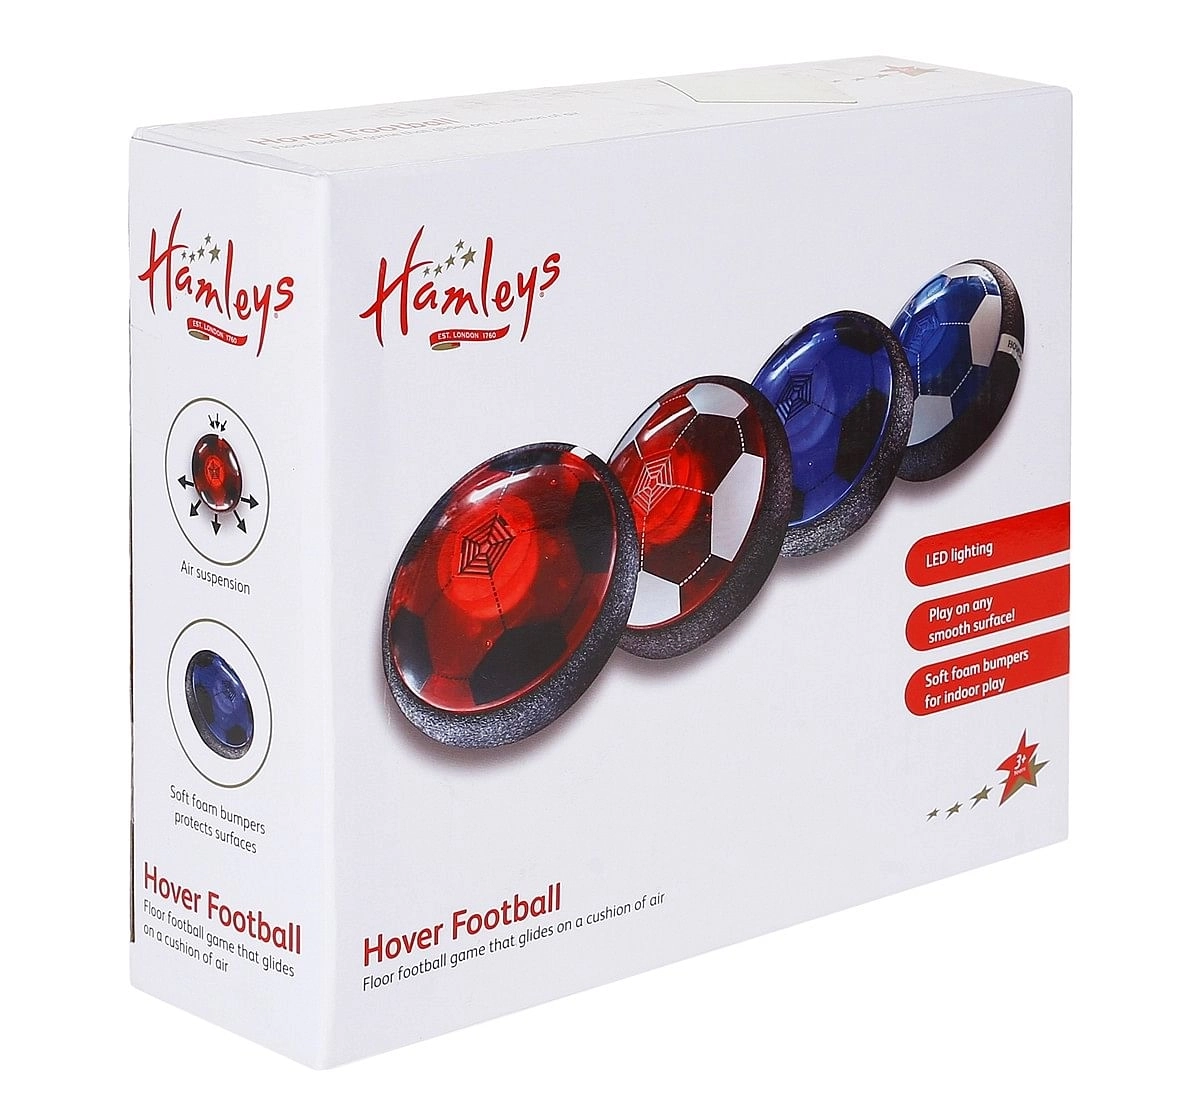 Hover Ball: Buy Hover Ball For Kids Online India 